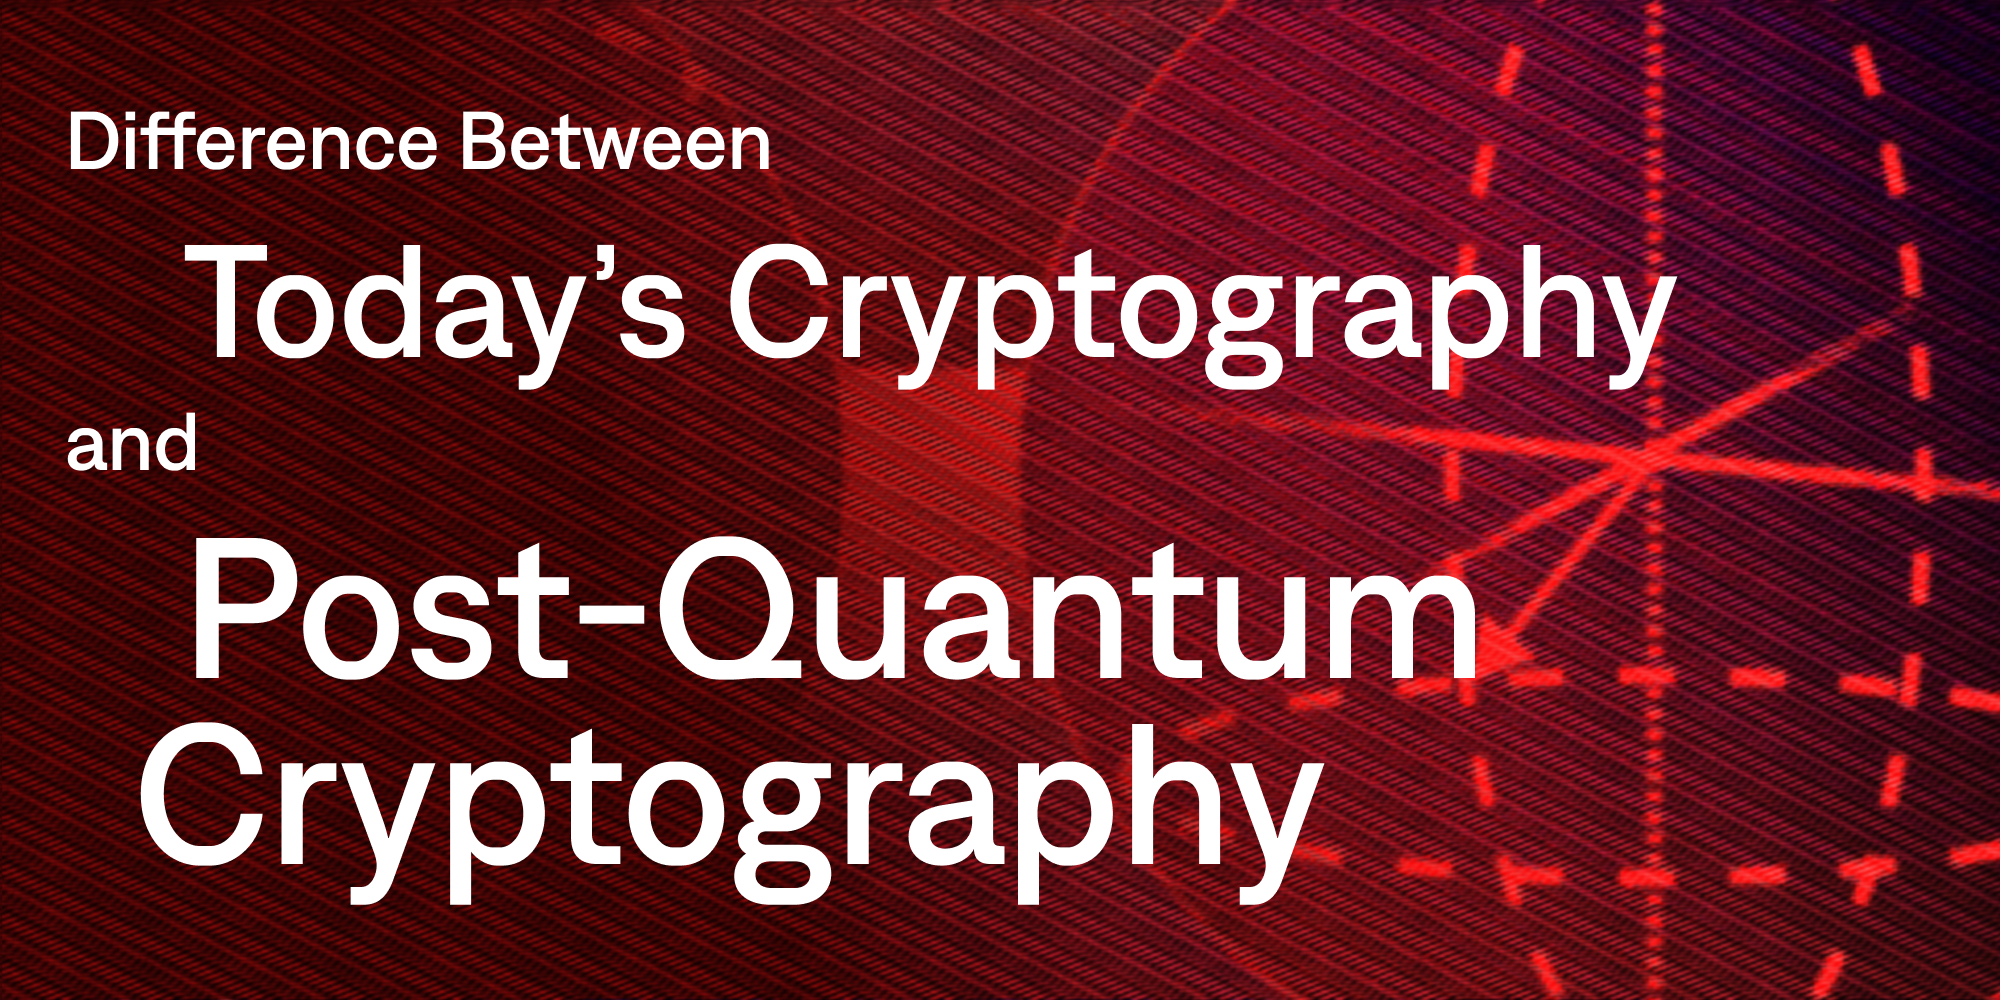 What’s the Difference Between Today’s Cryptography and Post-Quantum Cryptography?